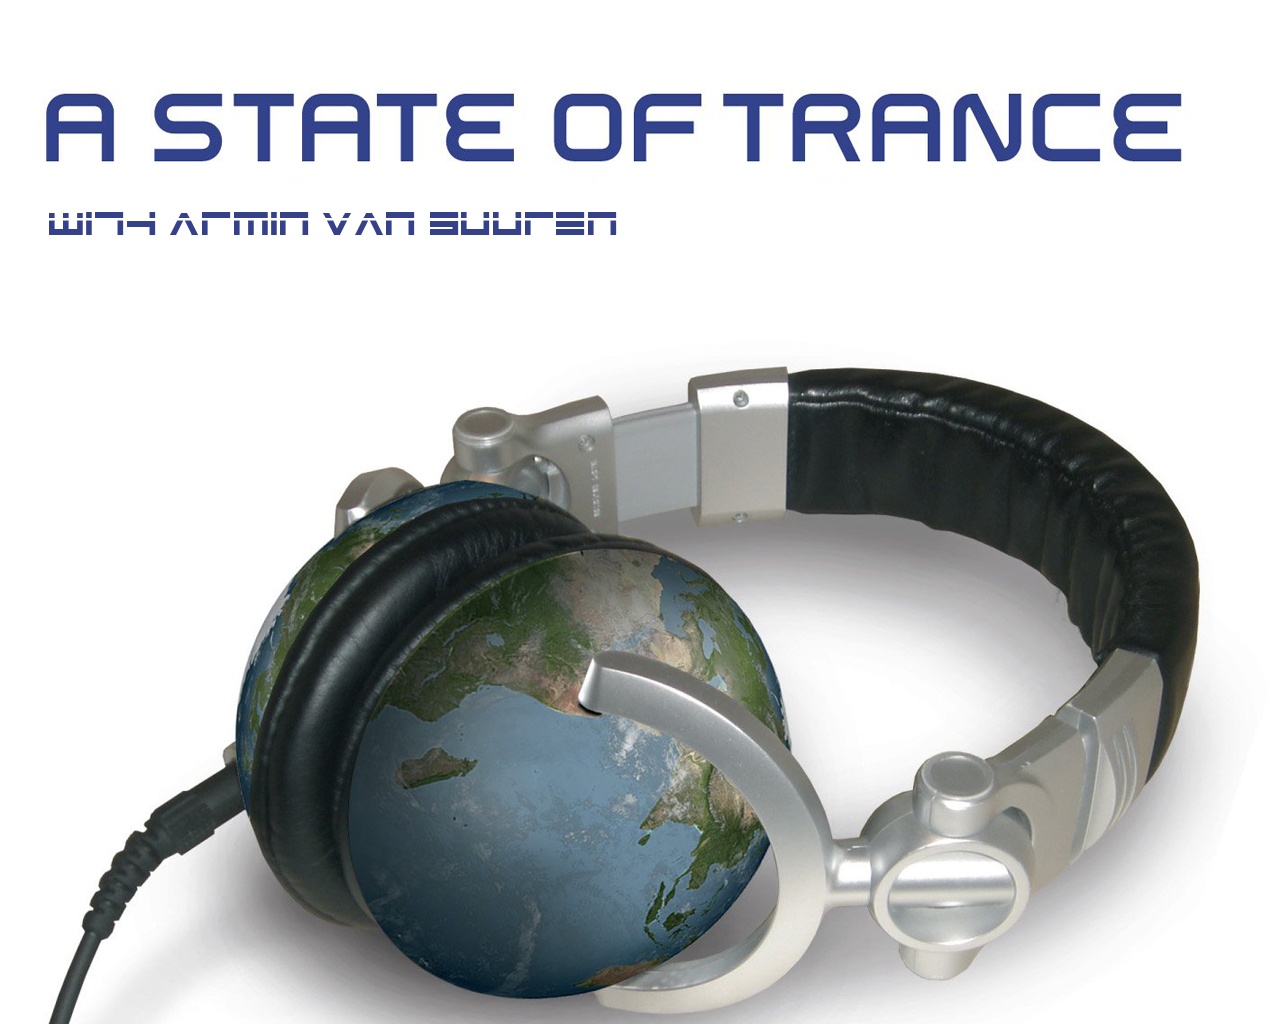 1280x1024 A State Of Trance wallpaper music and dance wallpapers